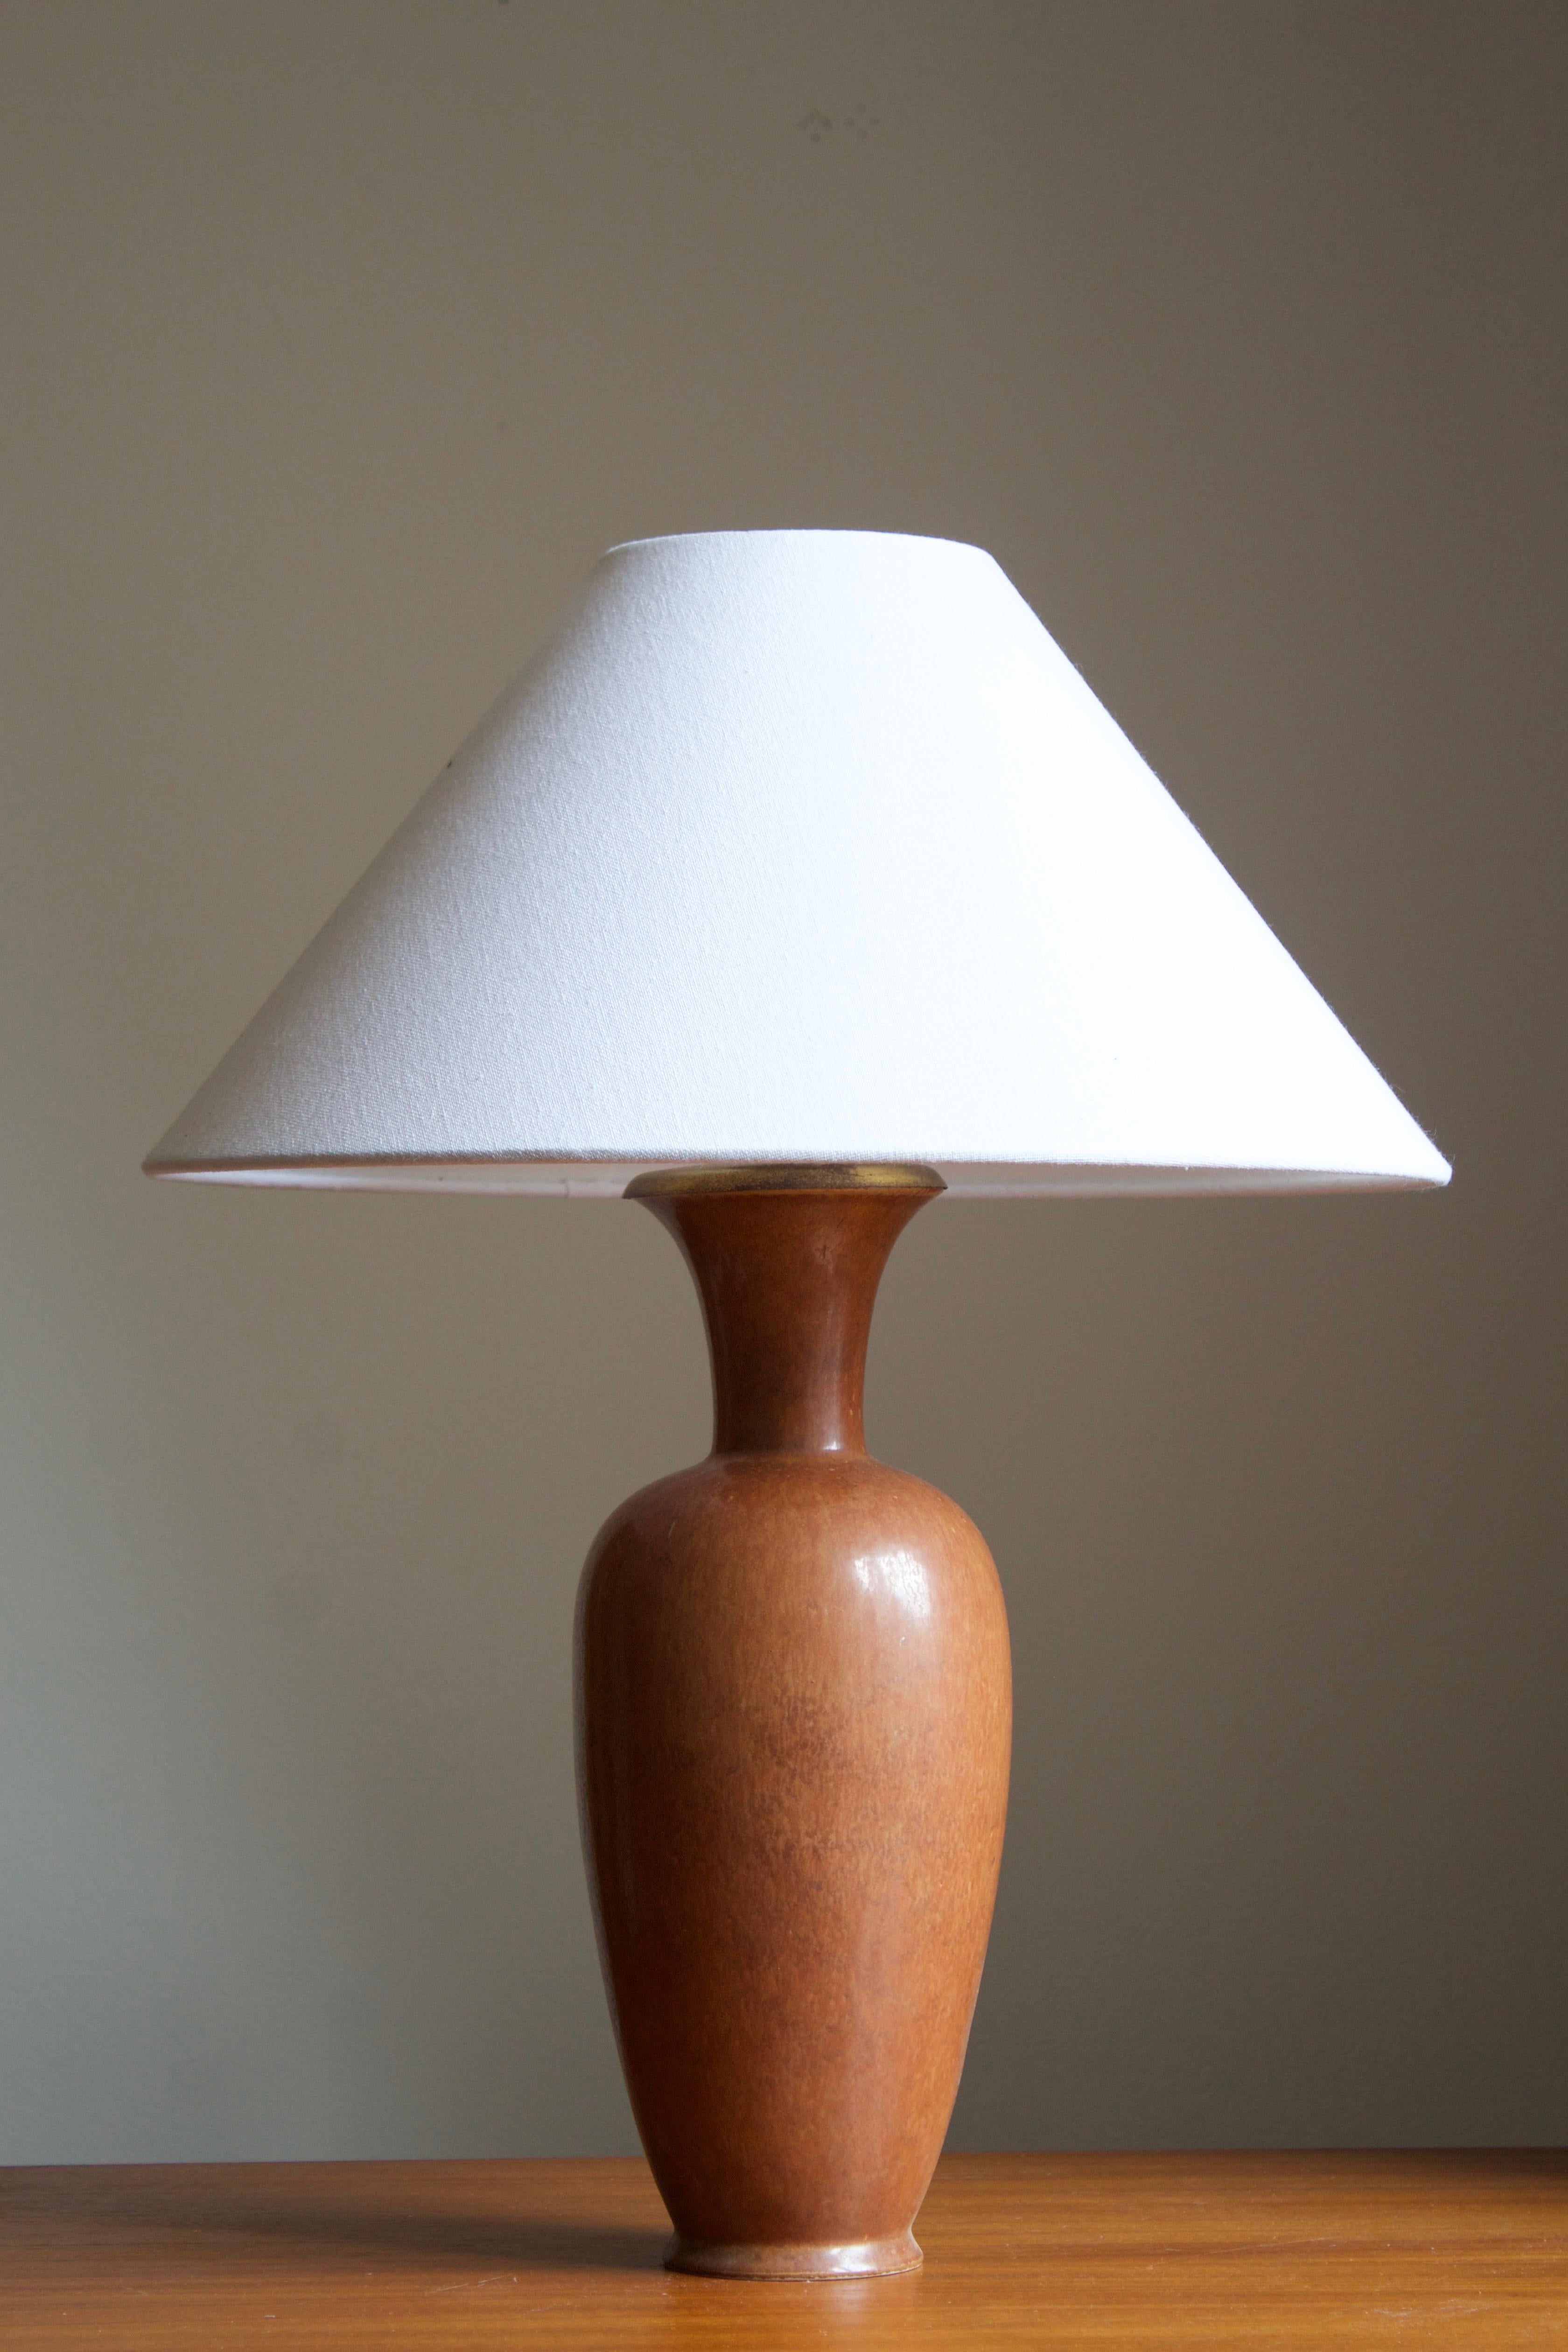 A table lamp produced by Rörstrand, Sweden, 1950s. Designed by Gunnar Nylund, (Swedish, 1914-1997). Signed. 

Stated dimensions exclude lampshade, height includes socket. Sold without lampshade.

Nylund served as artistic director at Rörstrand,